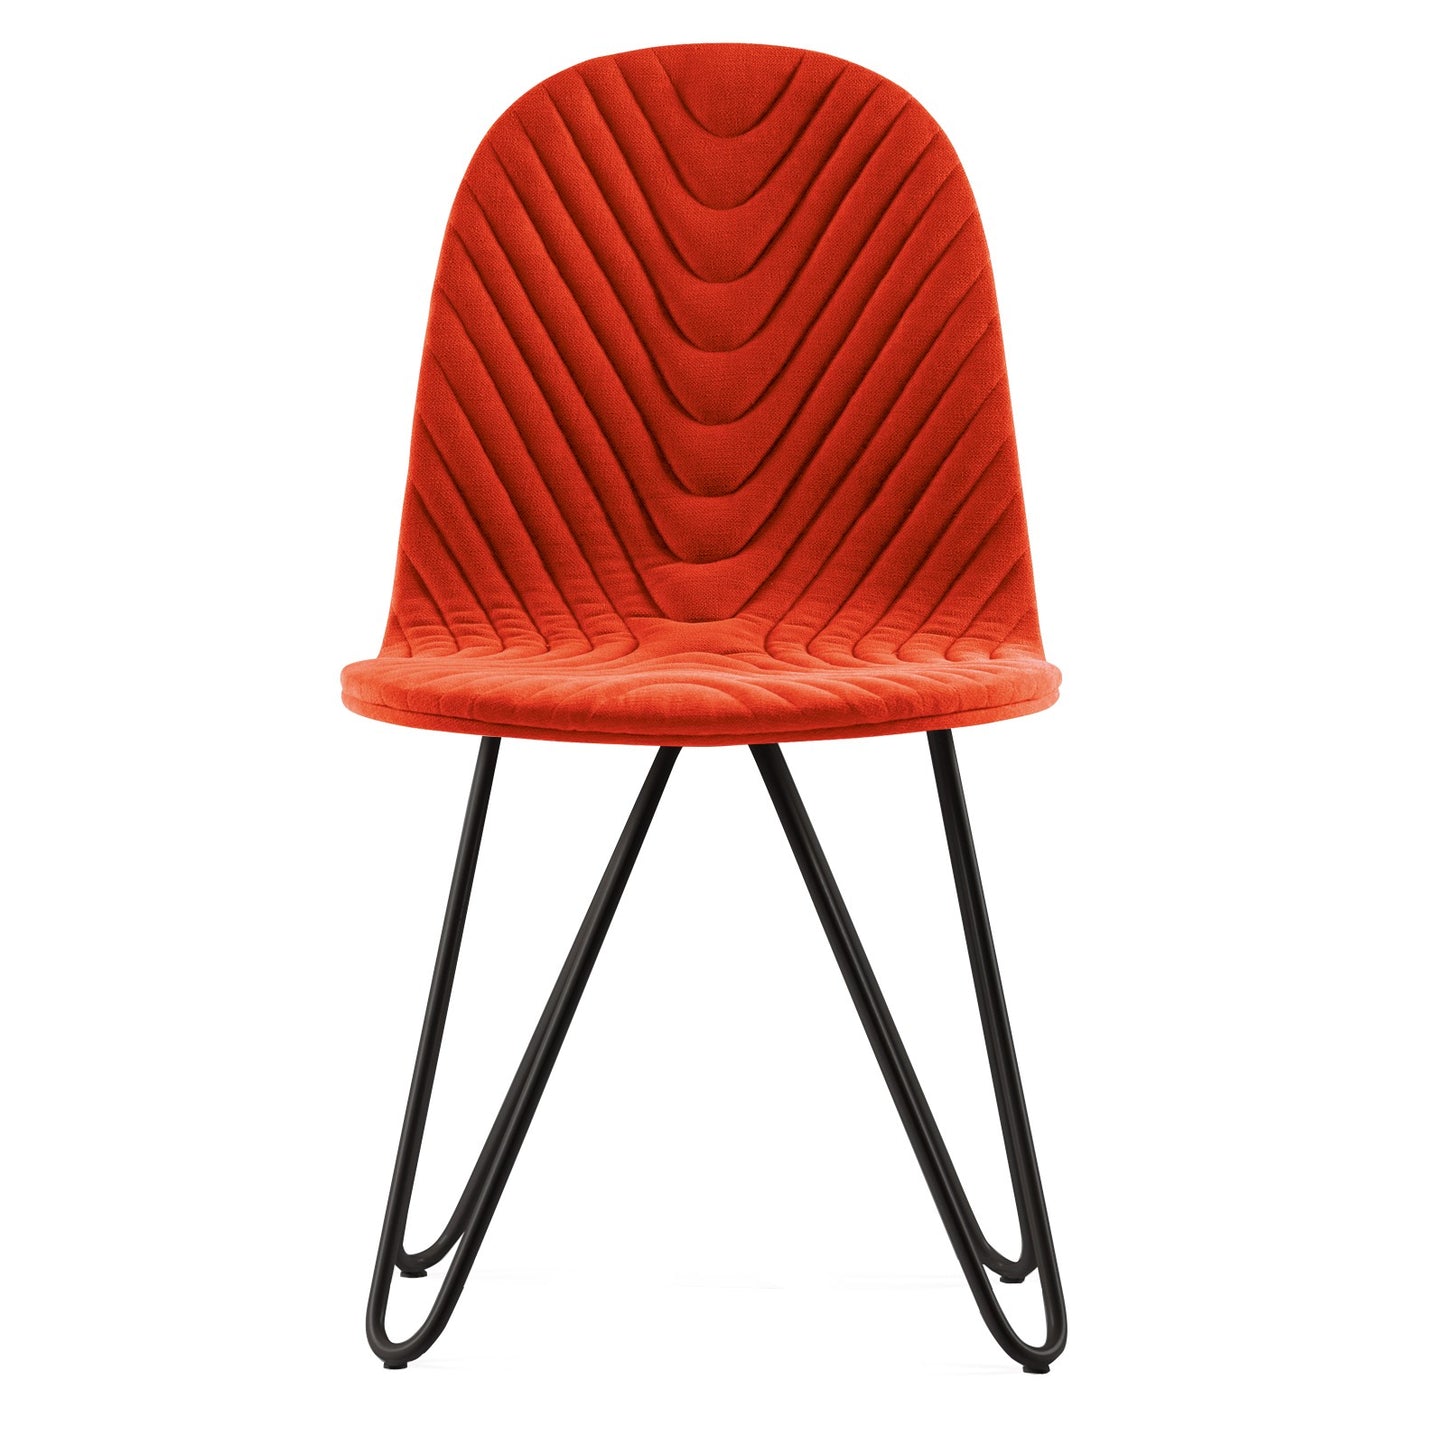 Chair Mannequin 03 - Red